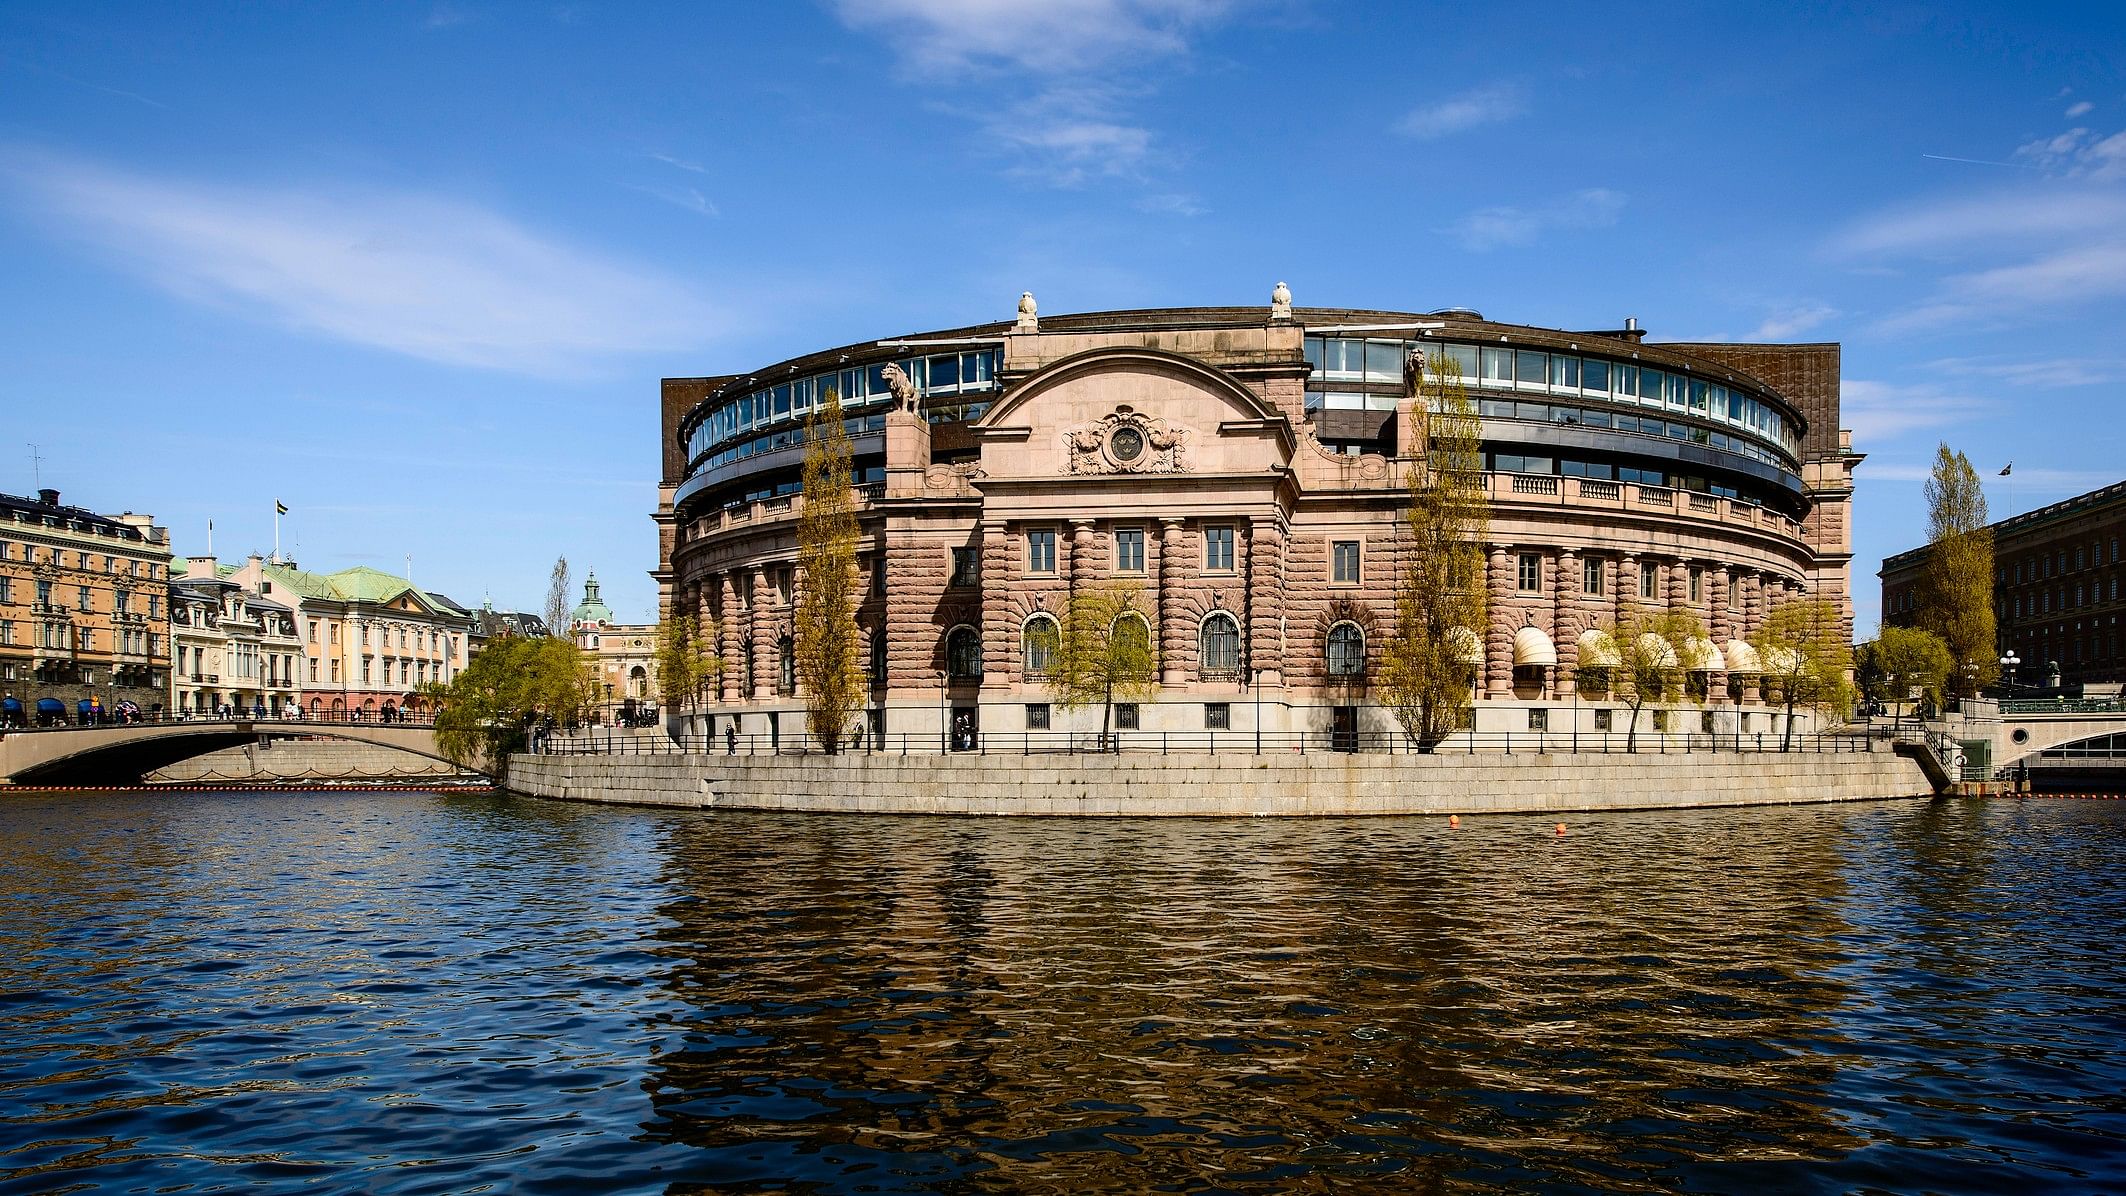 <div class="paragraphs"><p>The Riksdag (Swedish parliament building) is seen in this photo.&nbsp;</p></div>